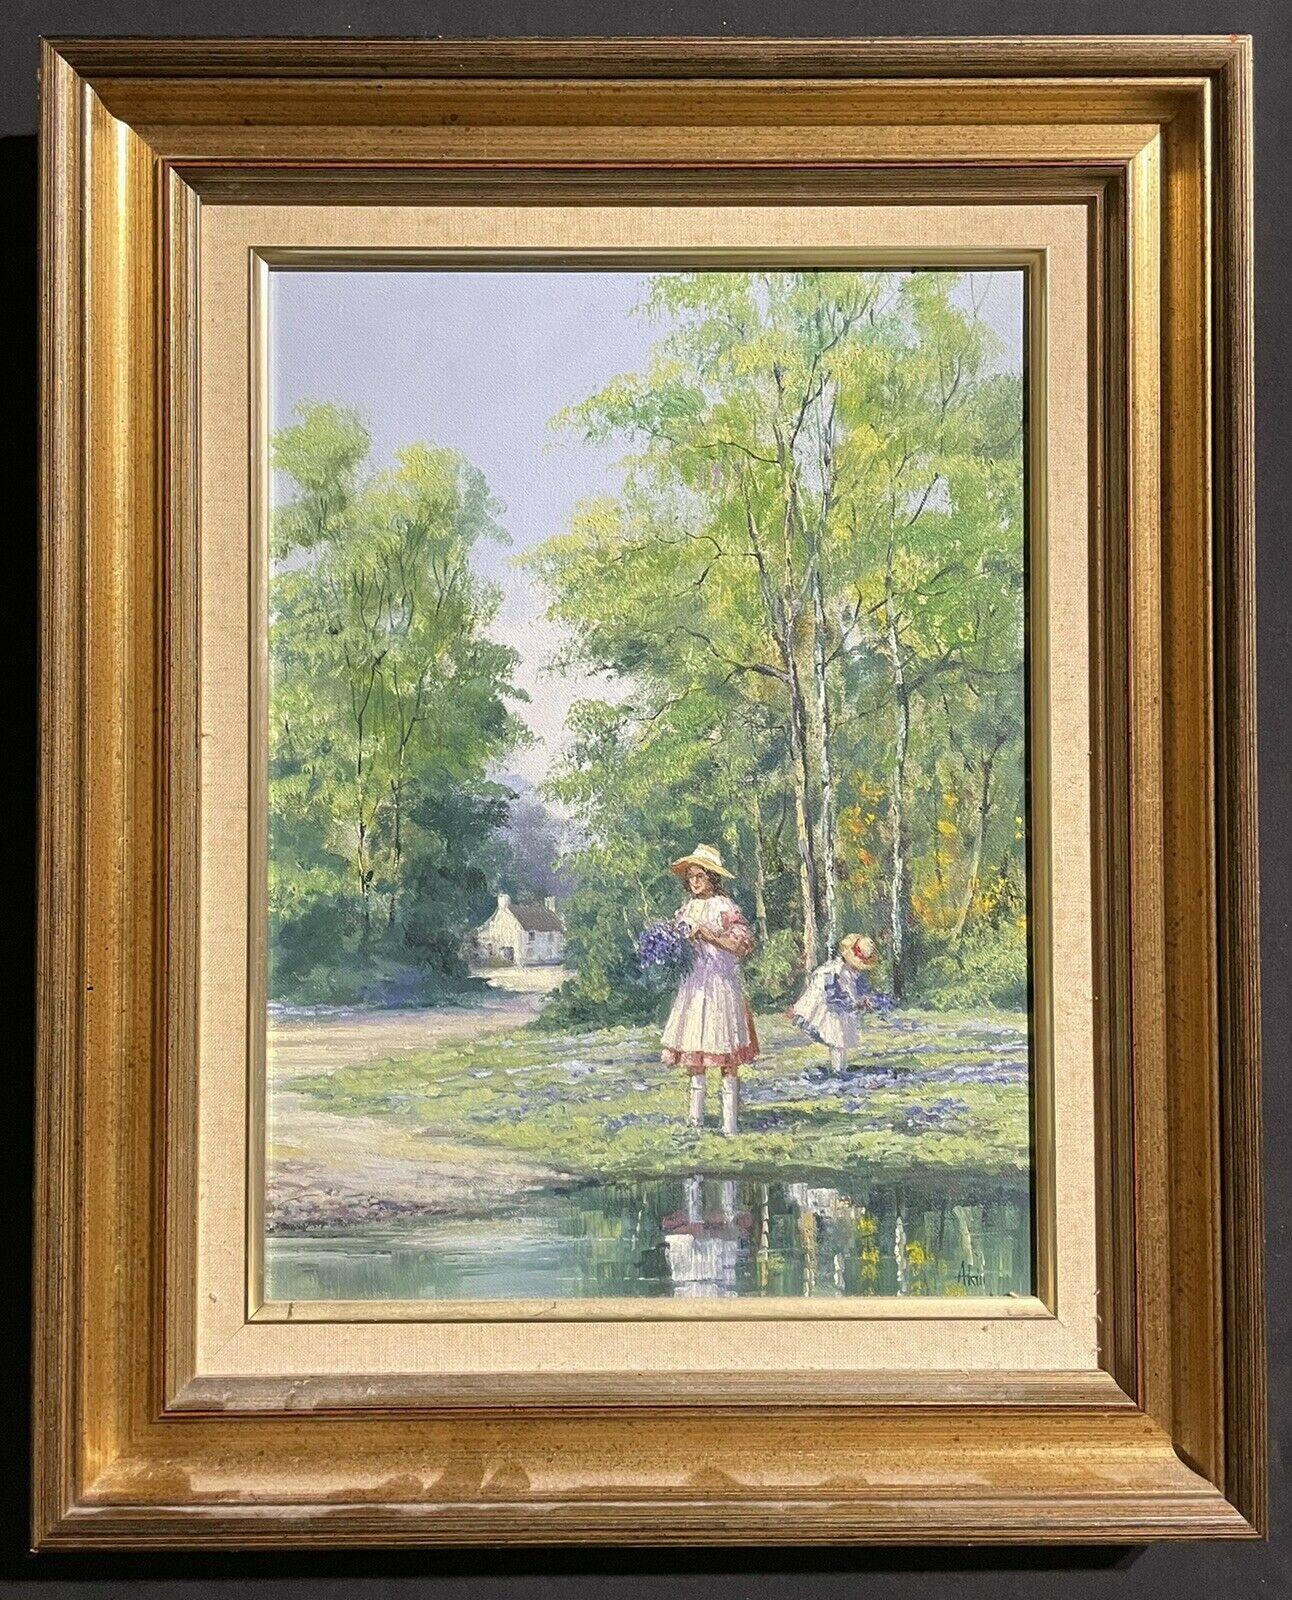 ALAN KING - ORIGINAL OIL PAINTING - CHILDREN GATHERING BLUEBELLS BY STREAM - Painting by Alan King